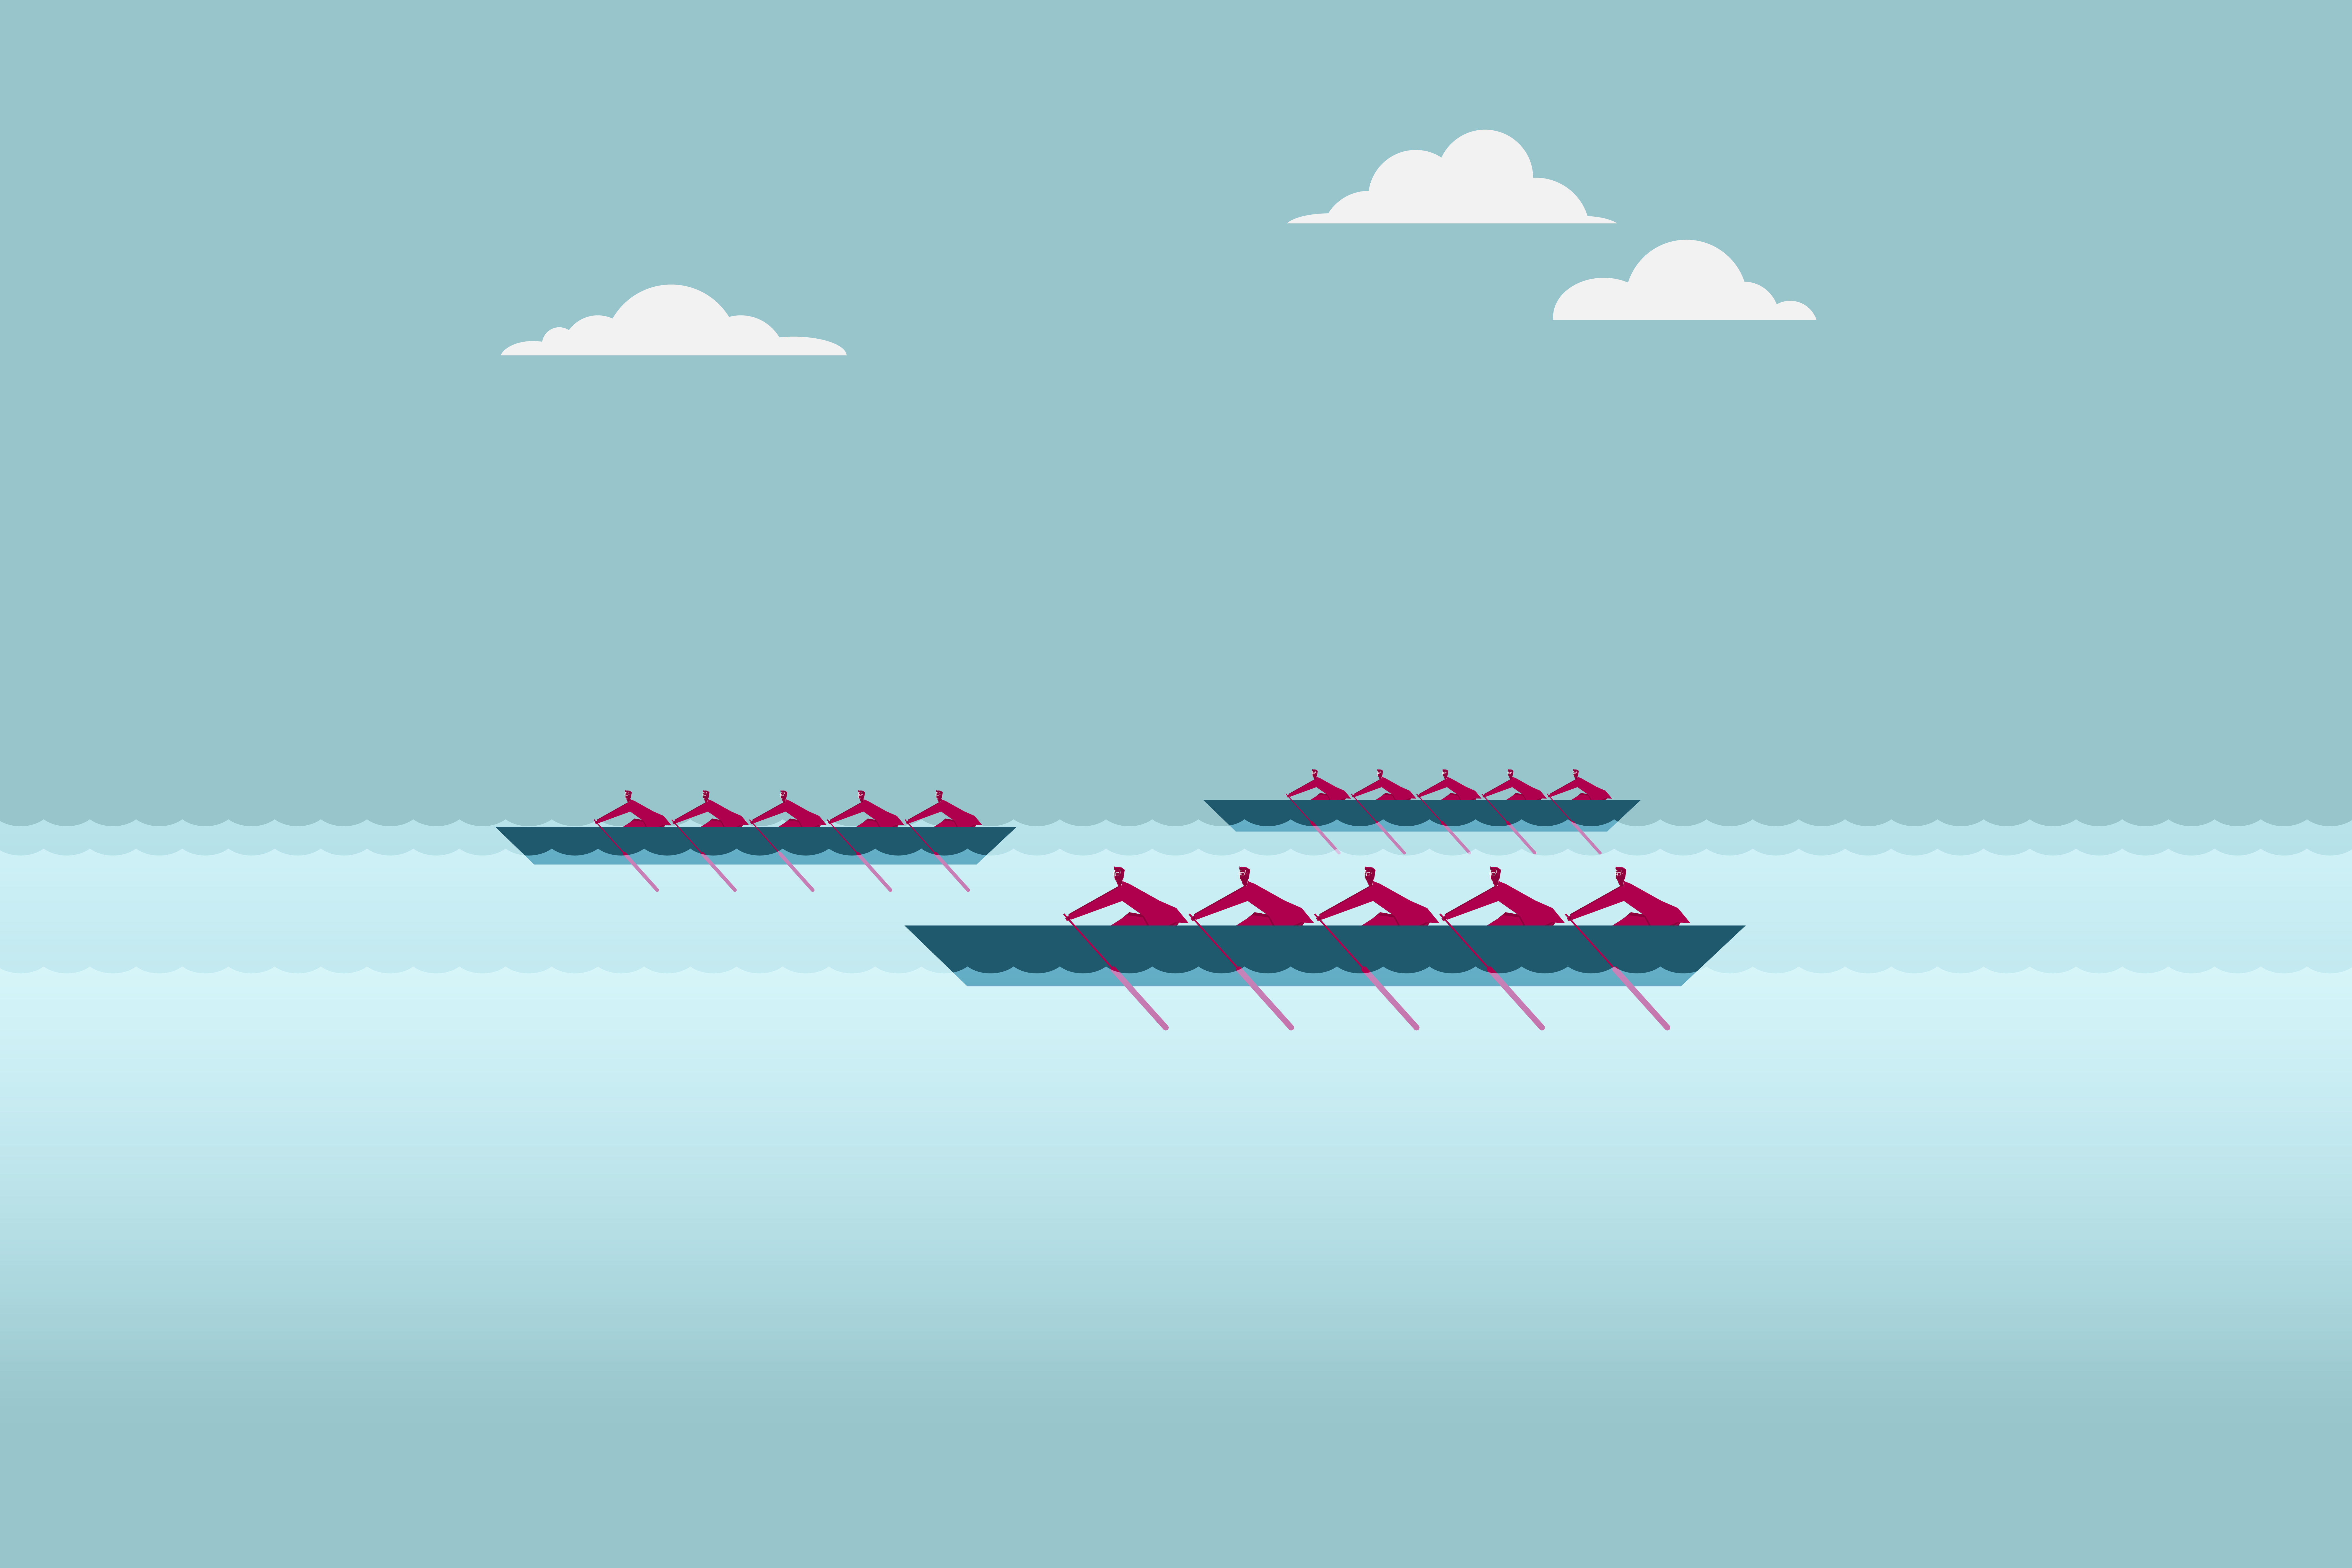 Two teams of rowers in sculls are racing on the water, with both boats in sync and creating ripples on the surface.